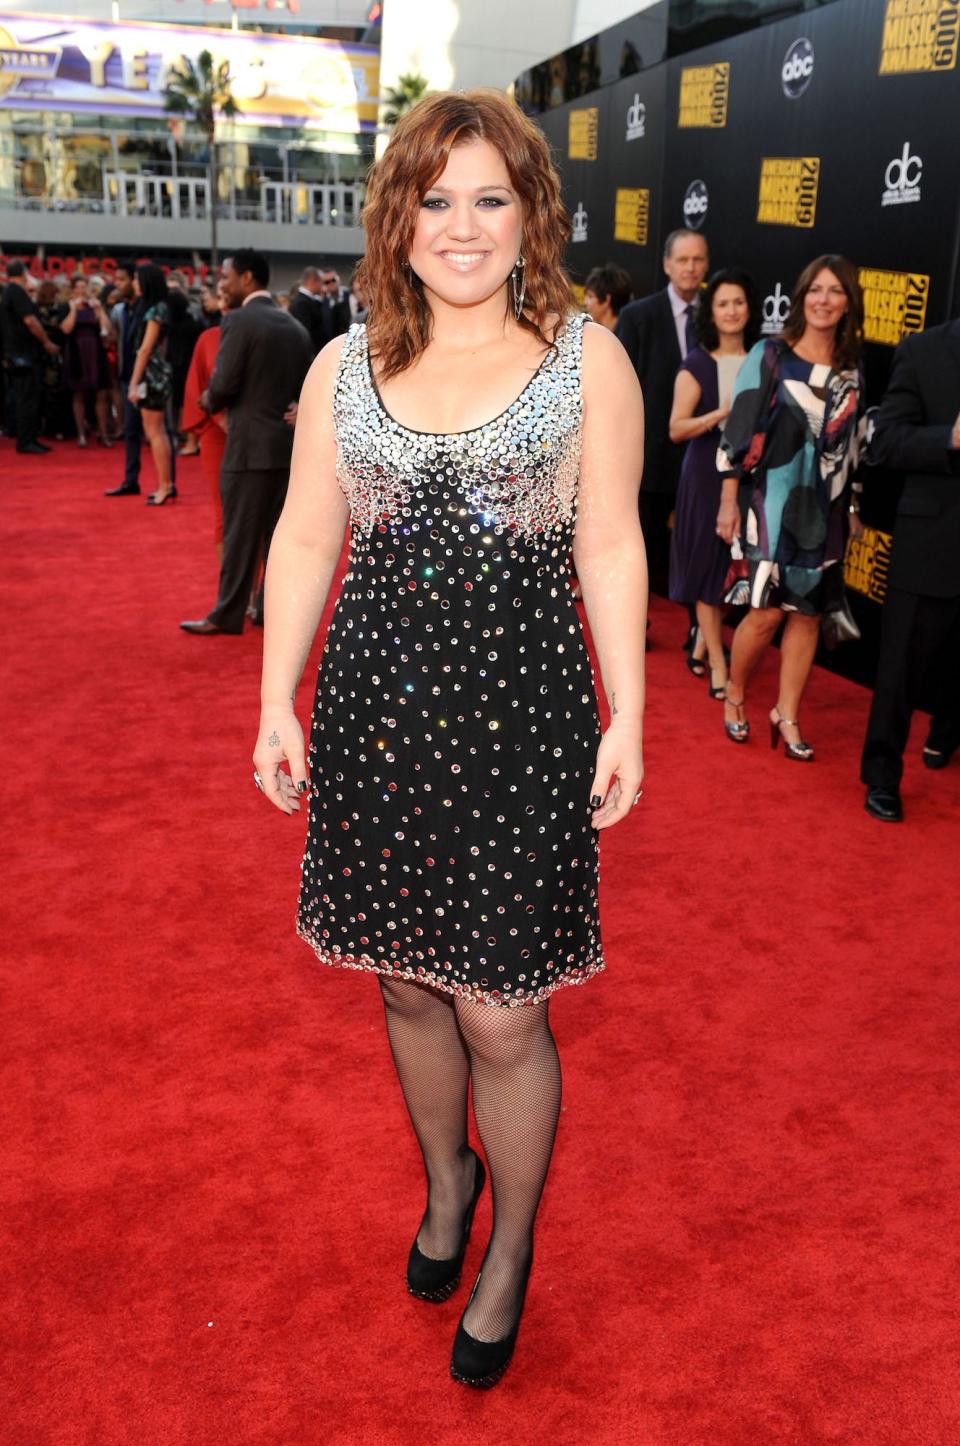 Kelly Clarkson attends the 2009 American Music Awards in Los Angeles, California.